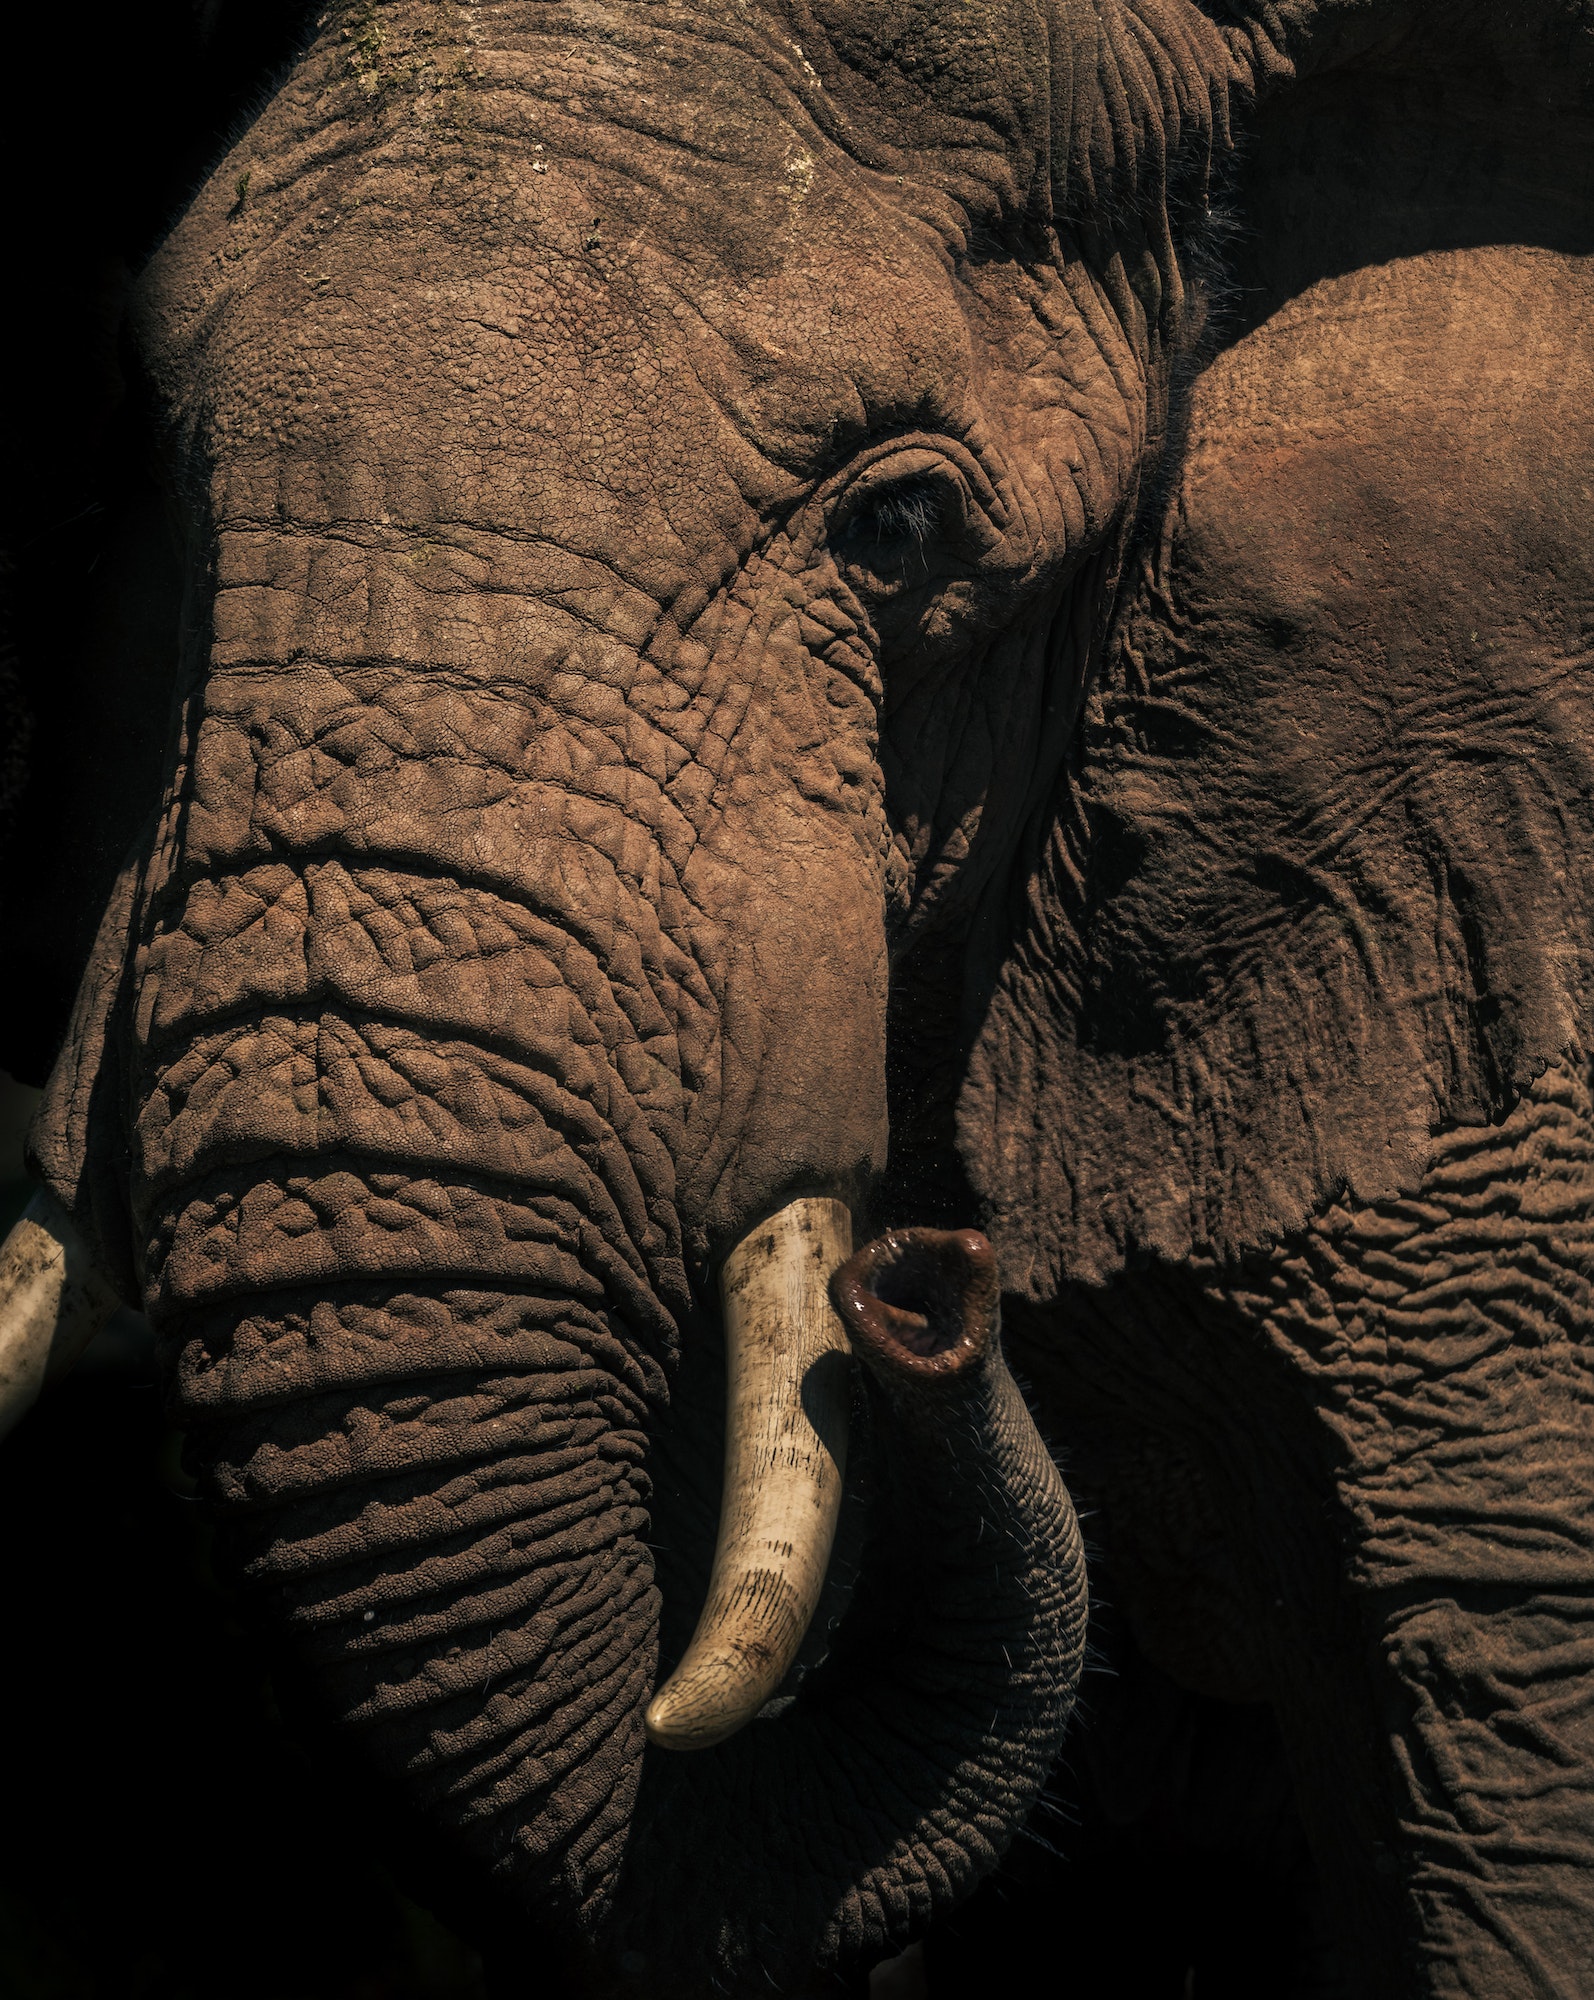 Portrait of an African Elephant (Loxodonta africana) on an African wildlife safari vacation in Aberd